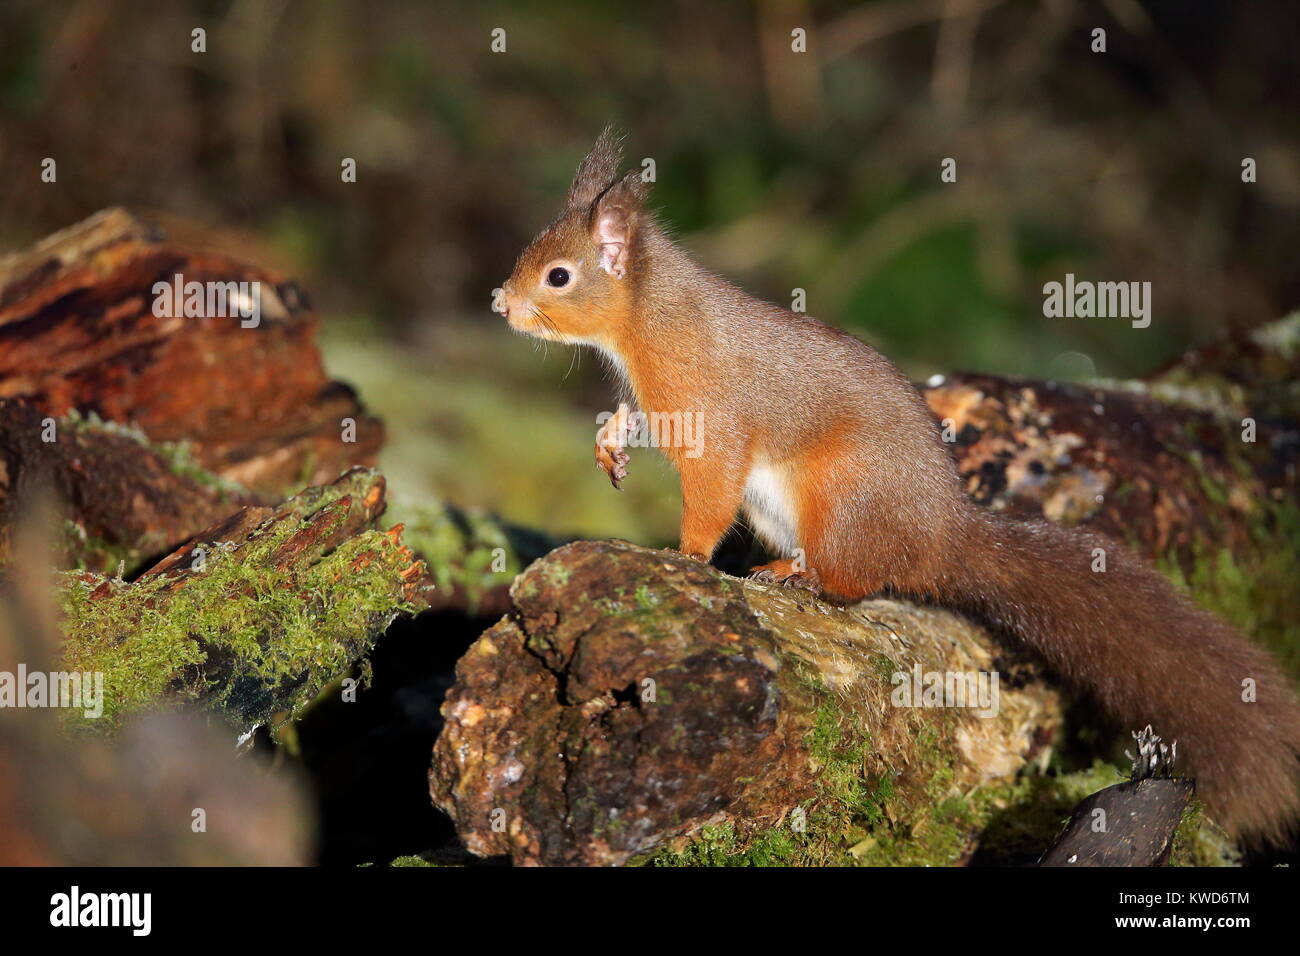 Paused Red Squirrel on log Stock Photo